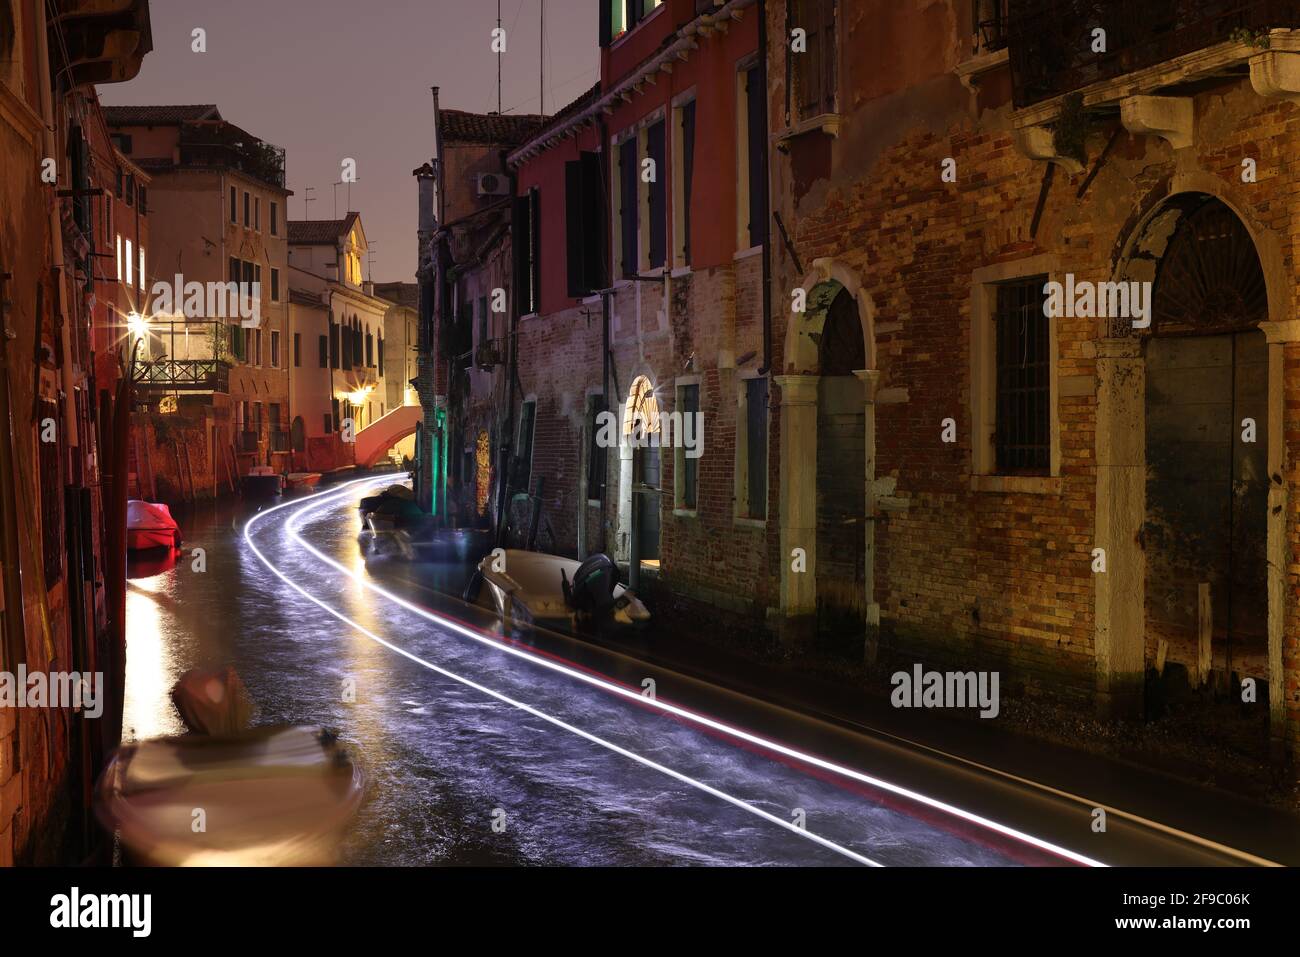 Venice, light trails of a boat on the canal in the sestiere Castello, Italy Stock Photo